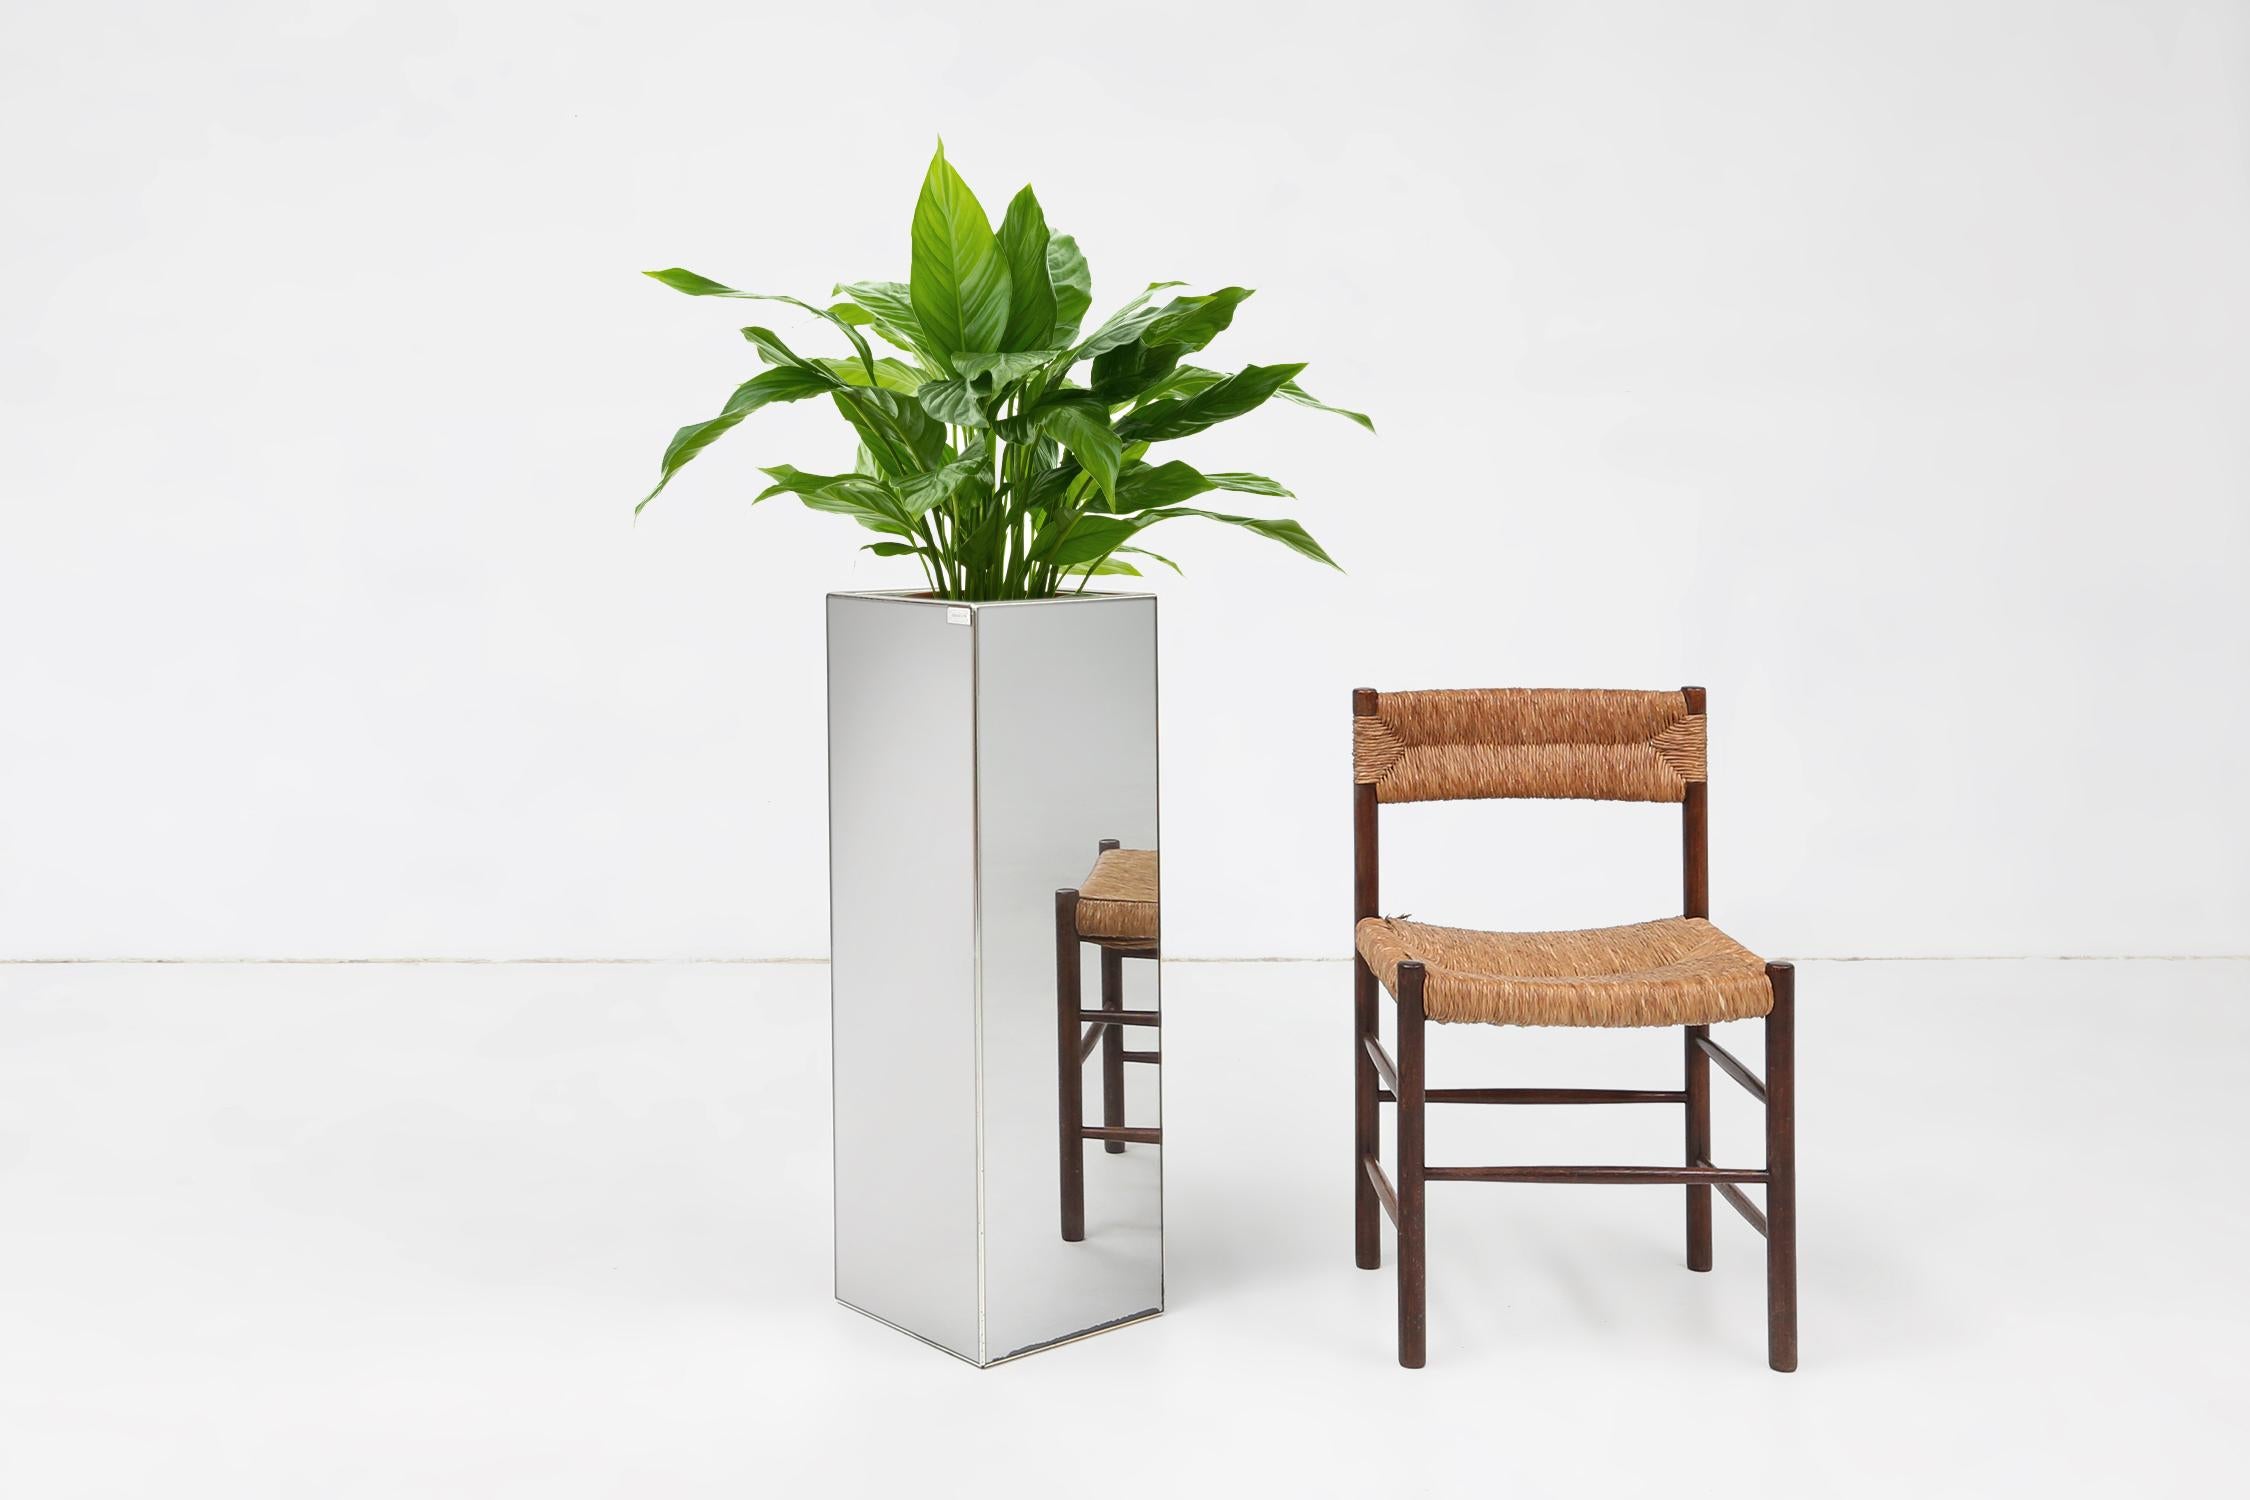 Belgium / 1980 / plant display stand / planter / mirror / Deknudt / mid-century / design / vintage

A large mirror column planter or plant display made in Belgium, 1980. This exquisite planter has 4 mirrored sides that are finished with a